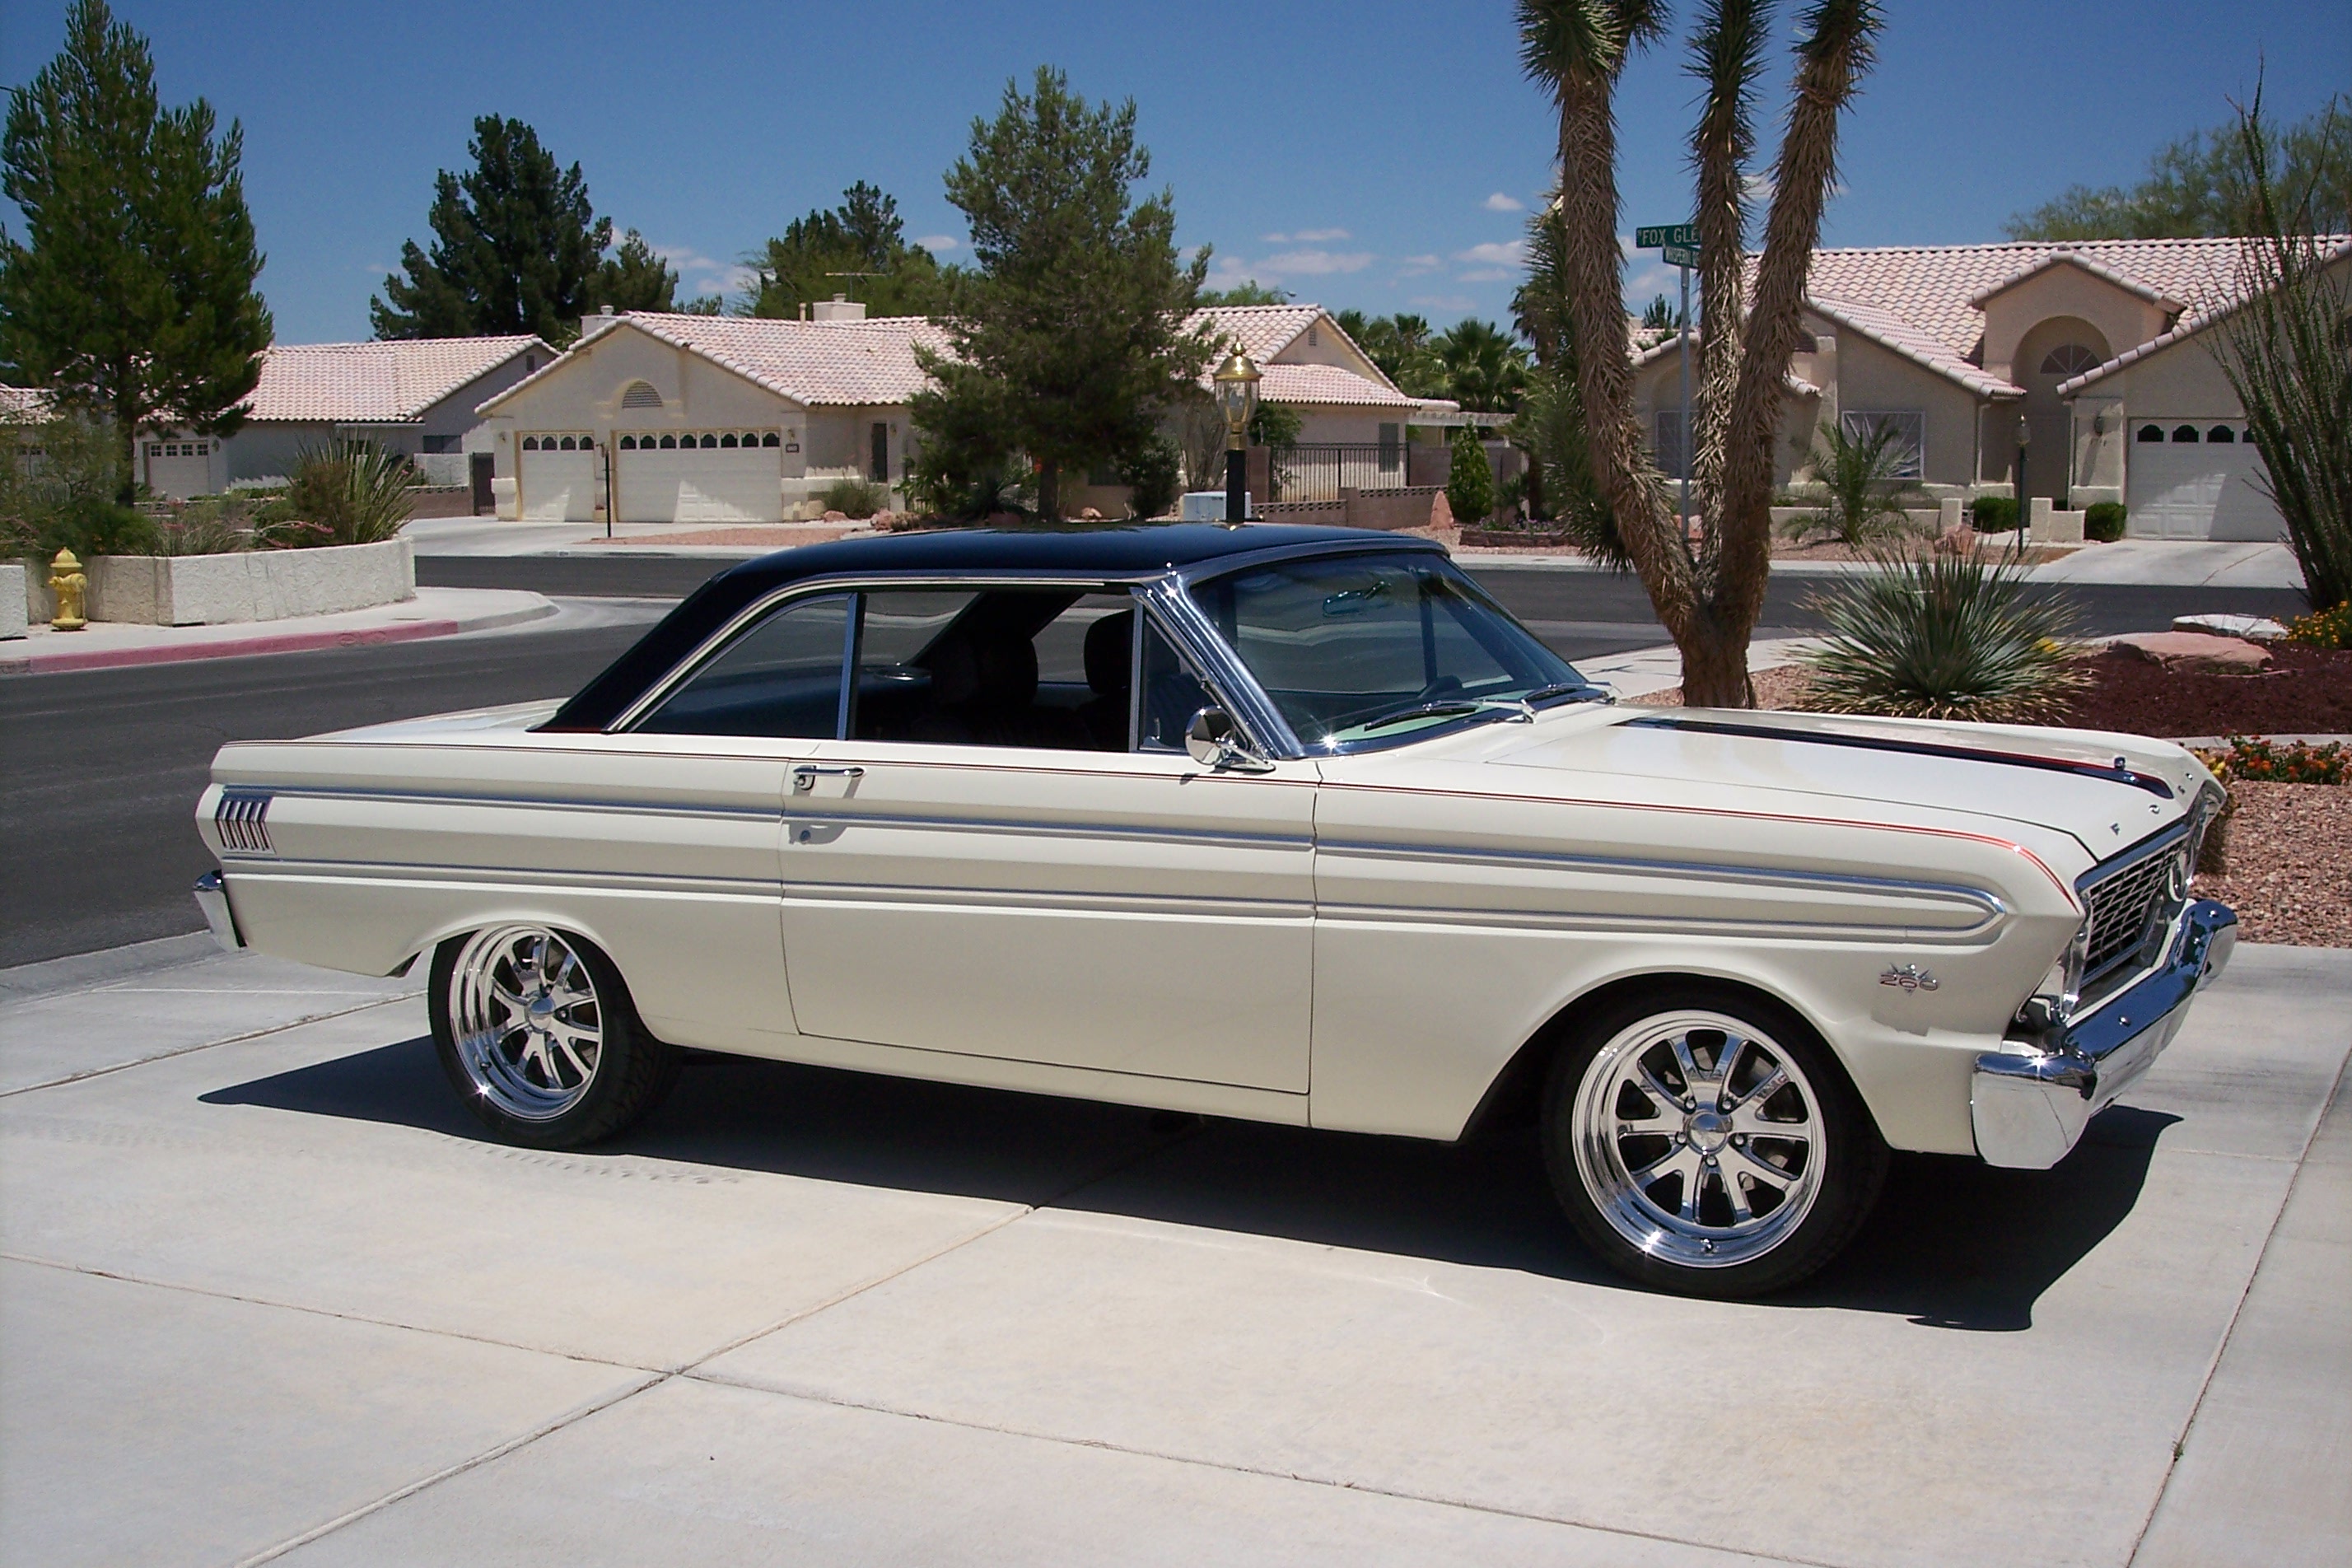 High Resolution Wallpaper | 1964 Ford Falcon 2856x1904 px